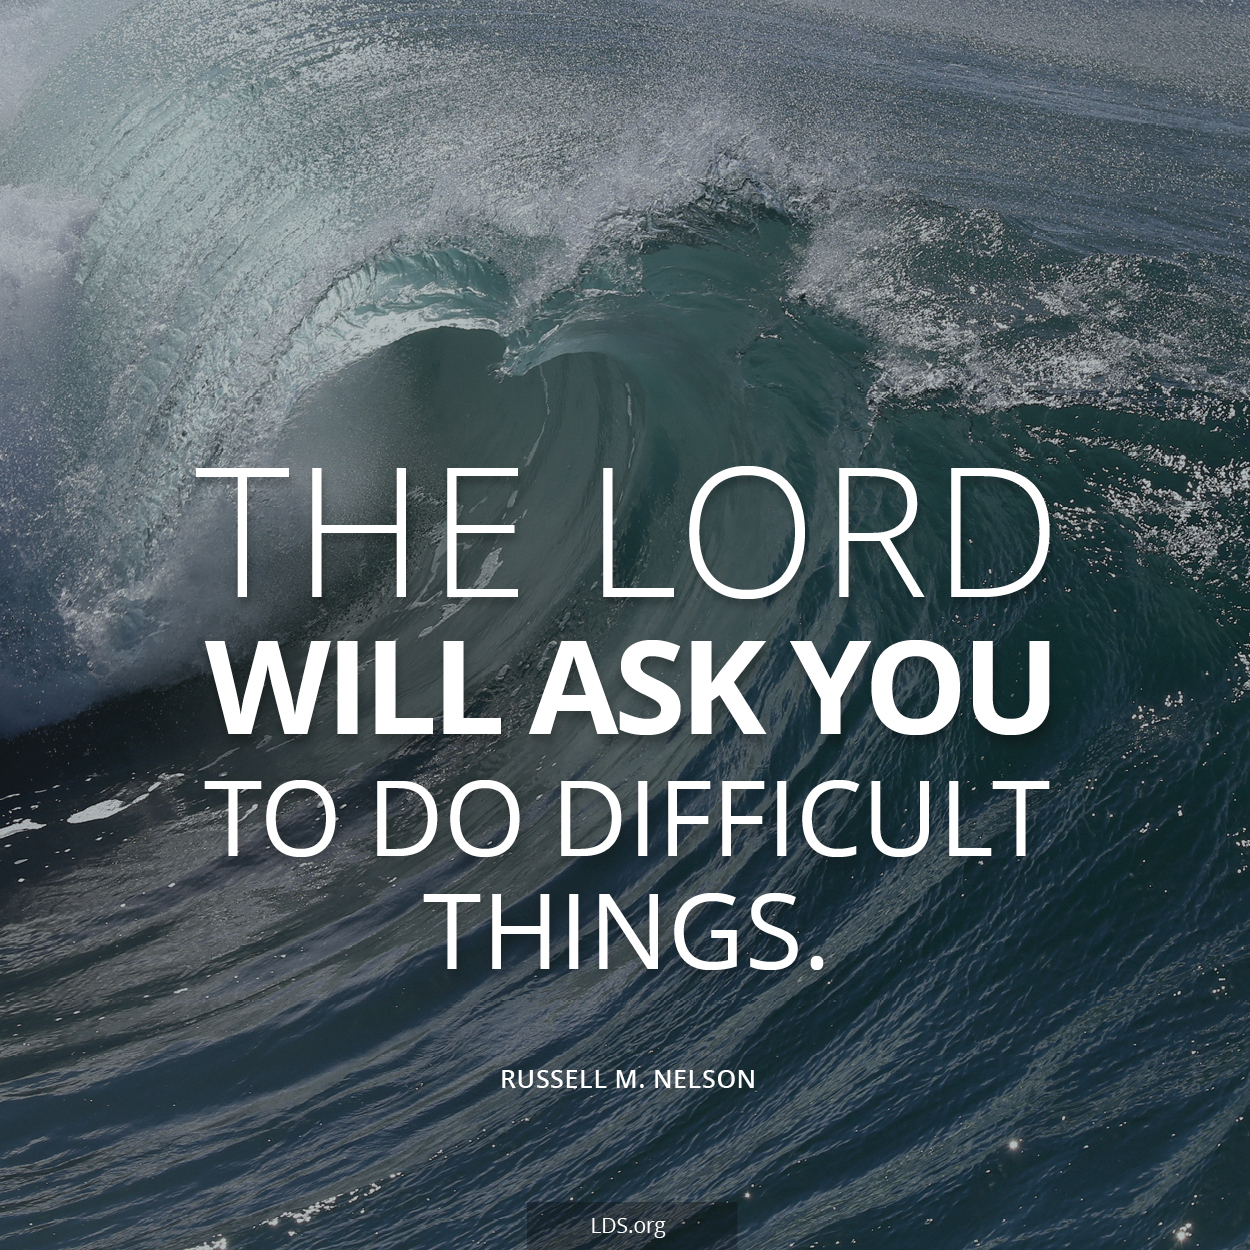 An image of a wave, with the words “The Lord will ask you to do difficult things.”